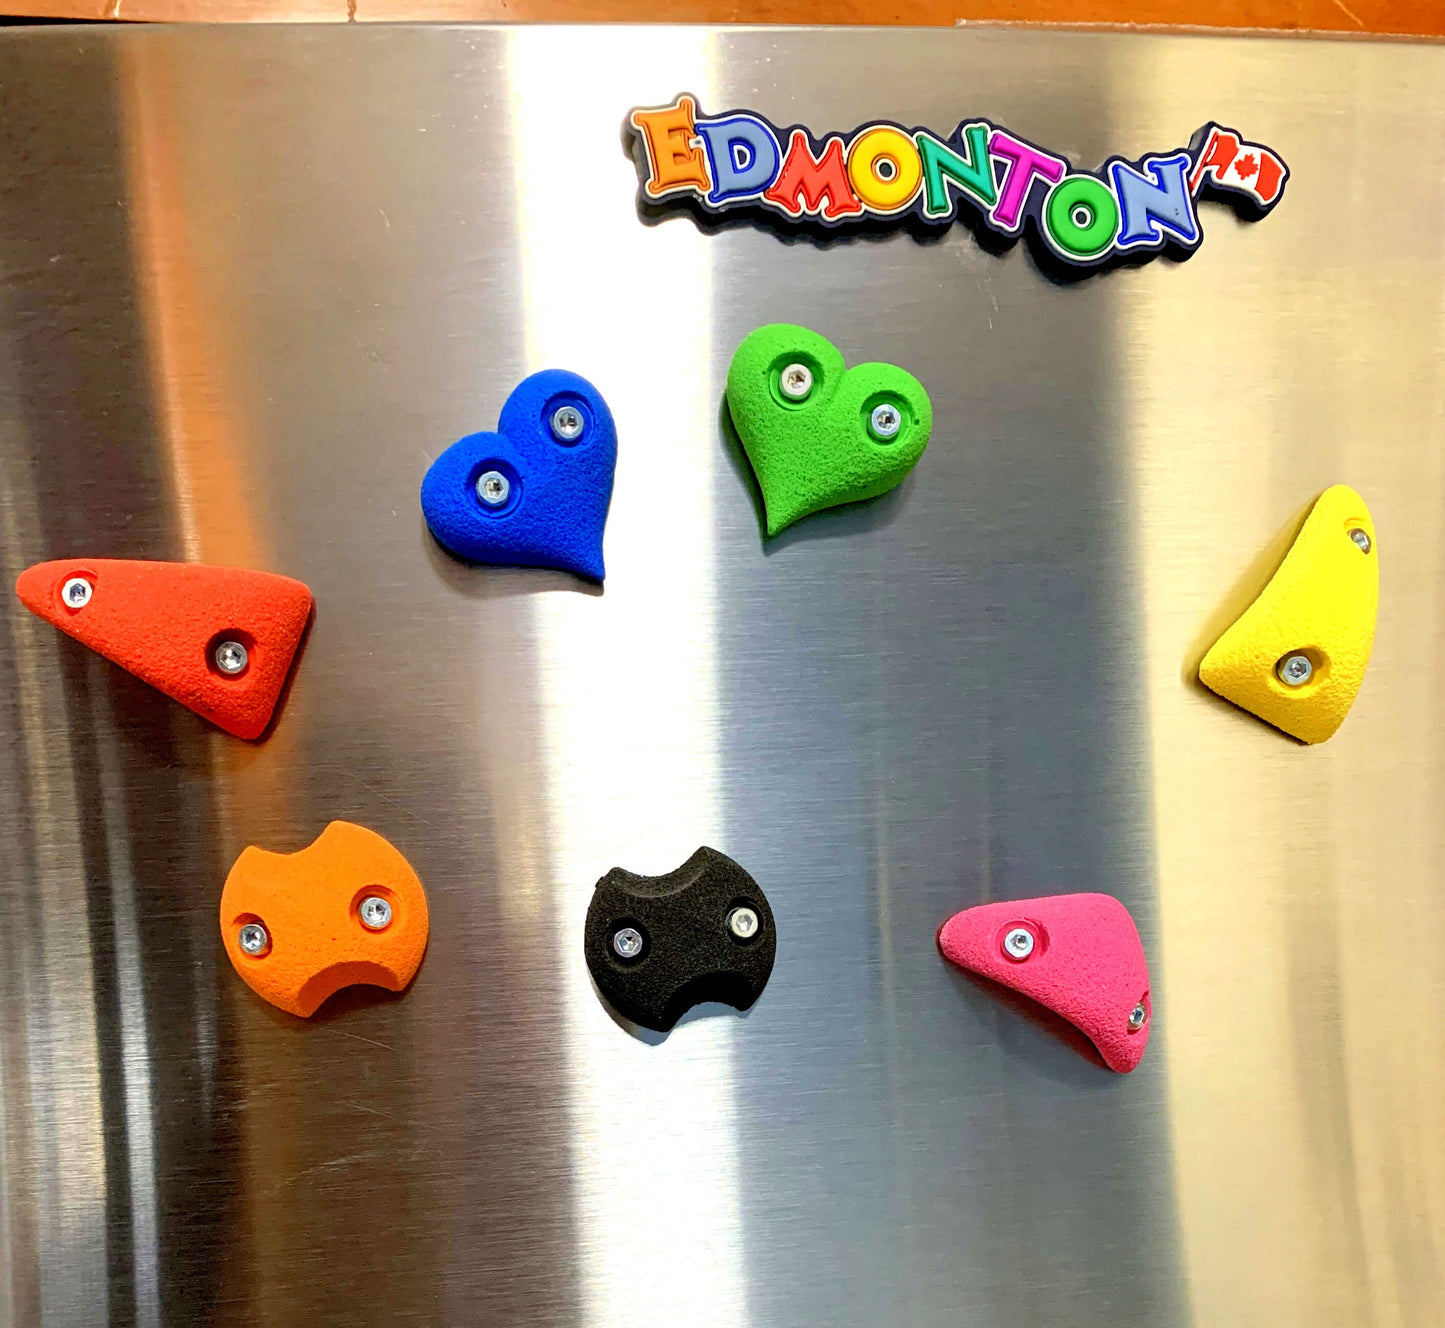 Climbing Magnets, Gift for Climbing Lover